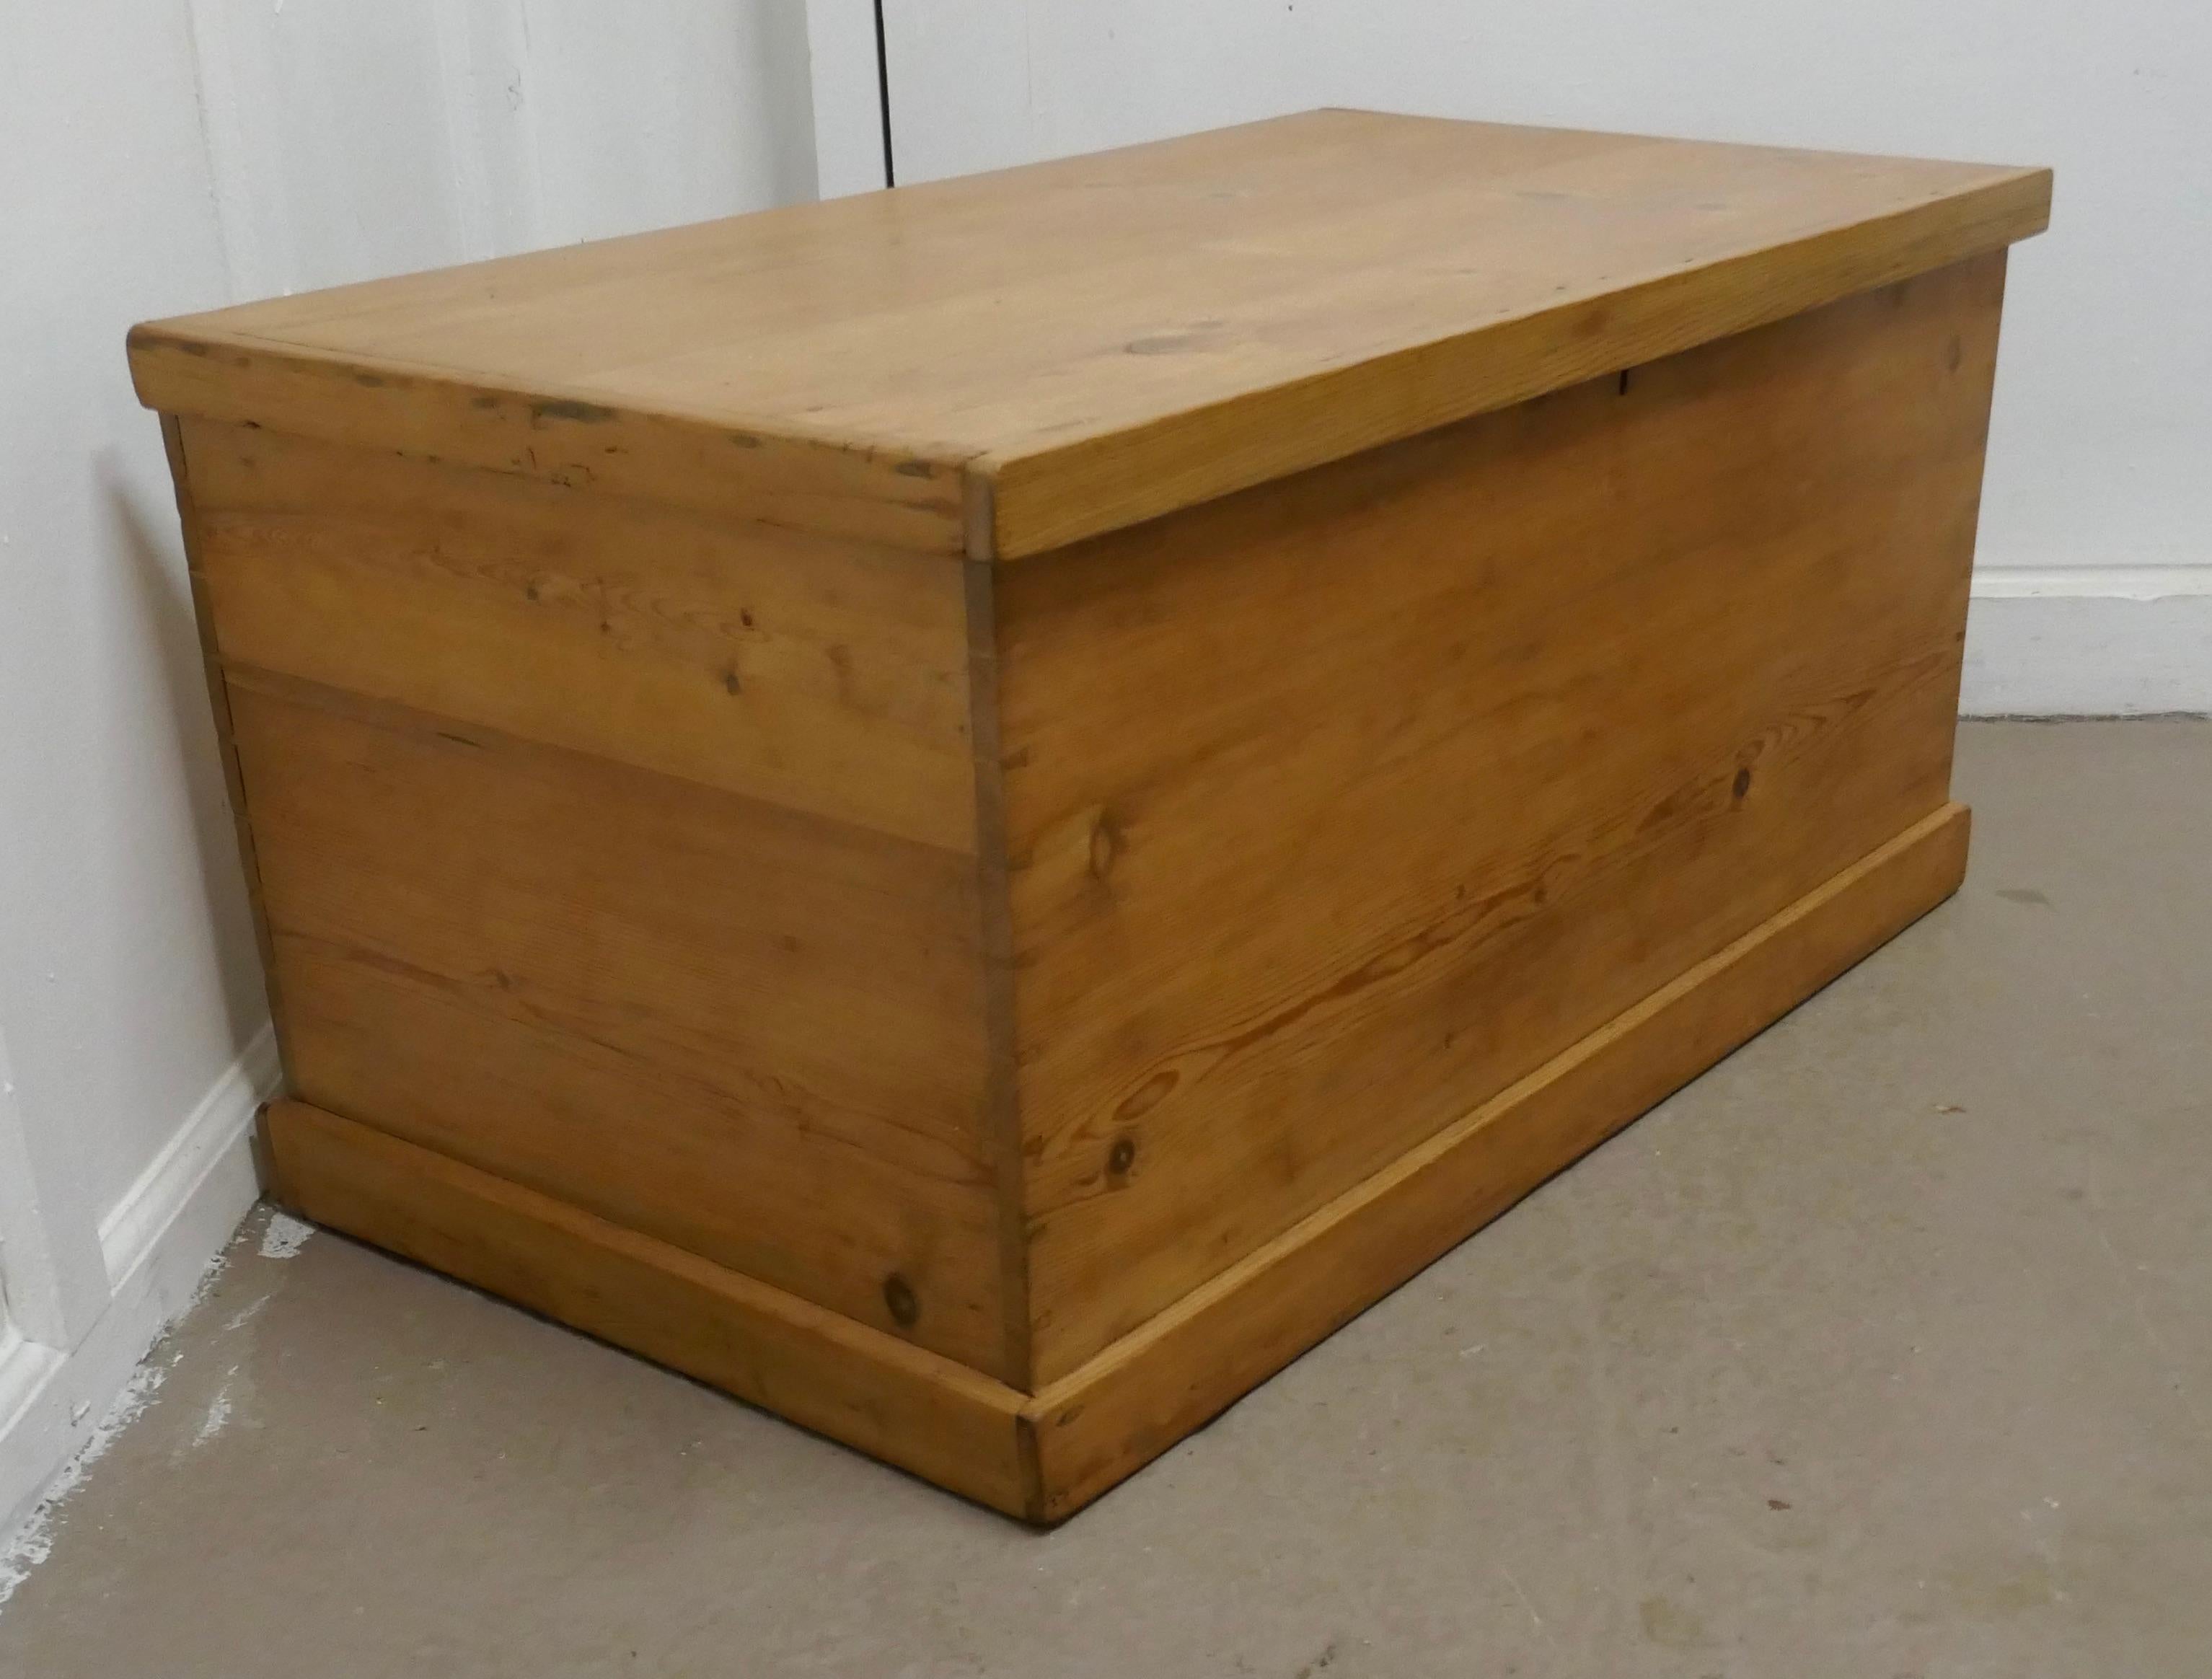 Victorian pine blanket box, coffee table or shoe tidy
 
Victorian pine blanket box or coffee table
This is a good quality pine box it has been fully restored, it has strap hinges and it stands on a neat plinth then runs all of the way around the